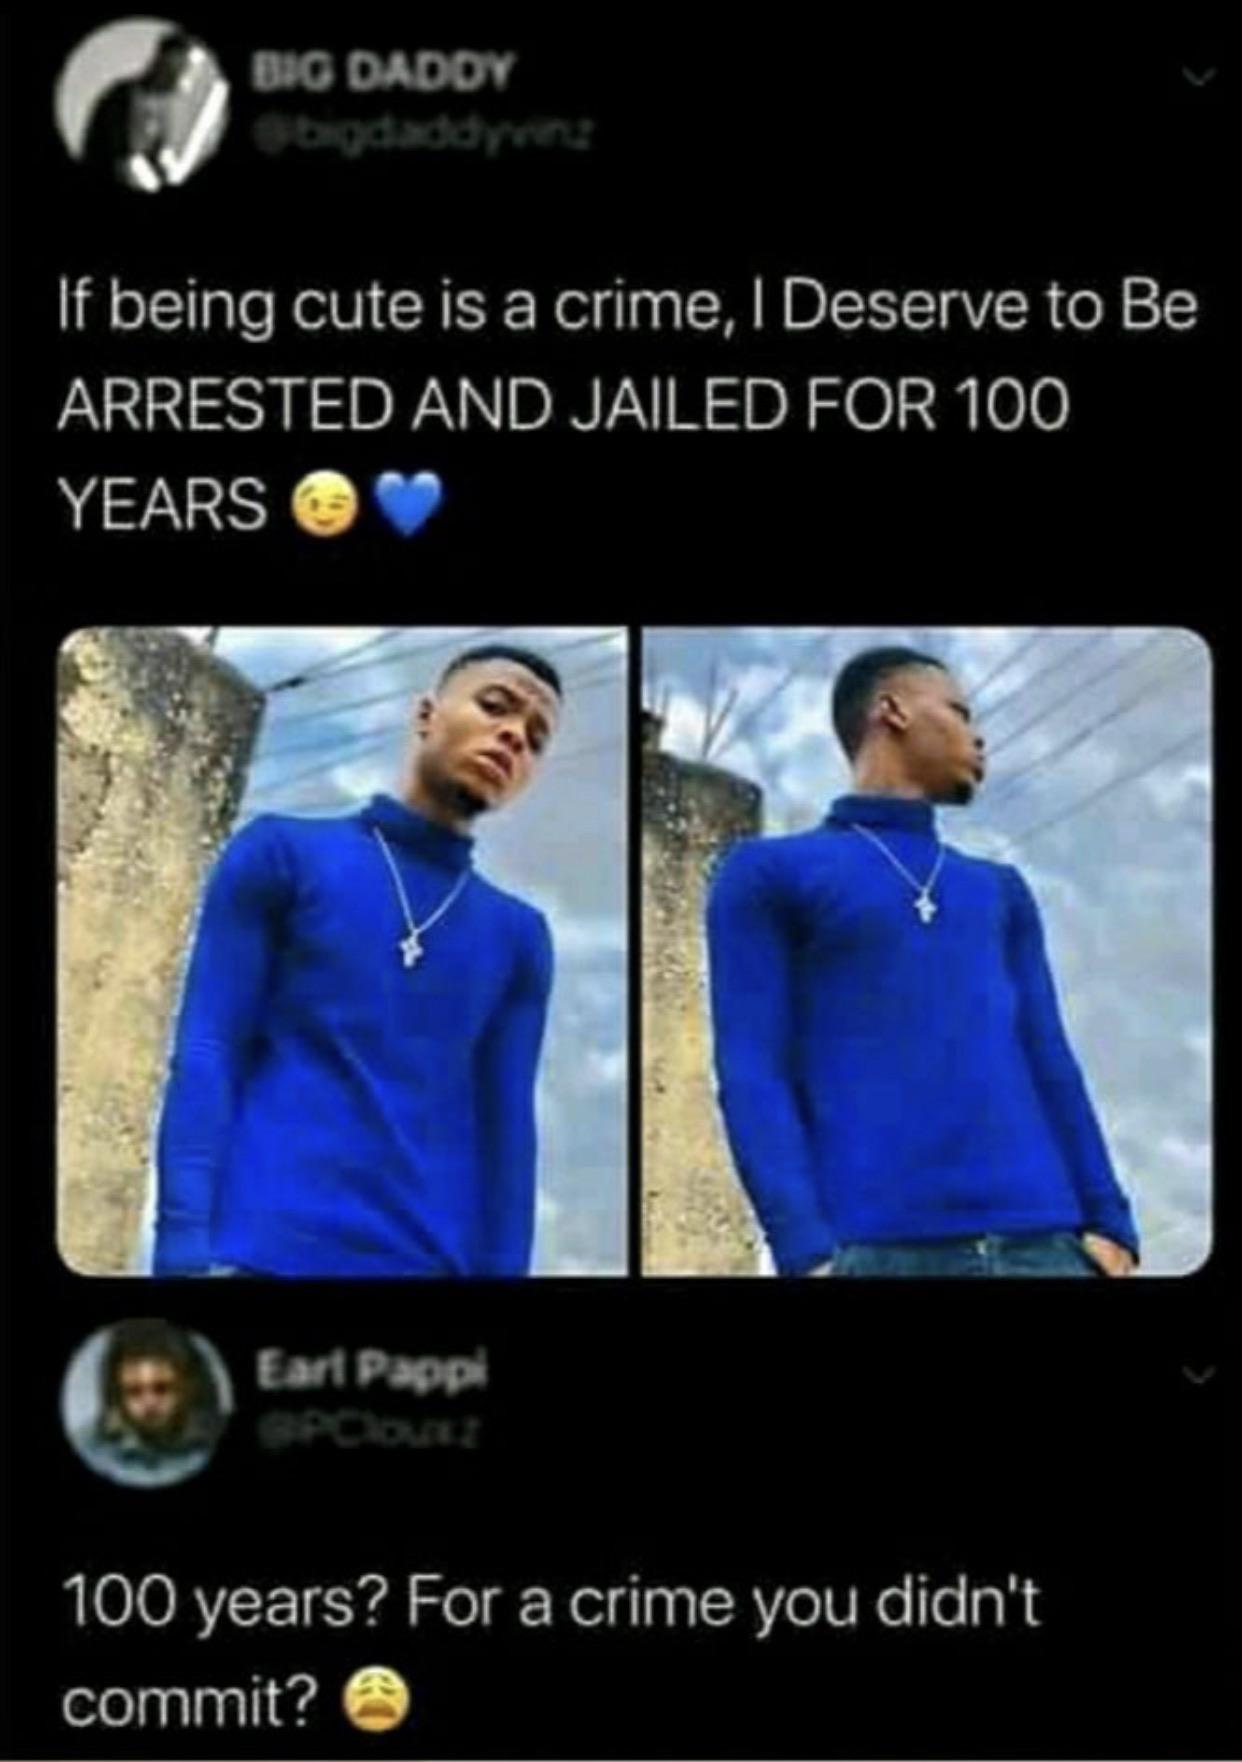 Crime - Big Dadoy 'If being cute is a crime, I Deserve to Be Arrested And Jailed For 100 Years Earl Pappi Earl Pappa 100 years? For a crime you didn't commit?